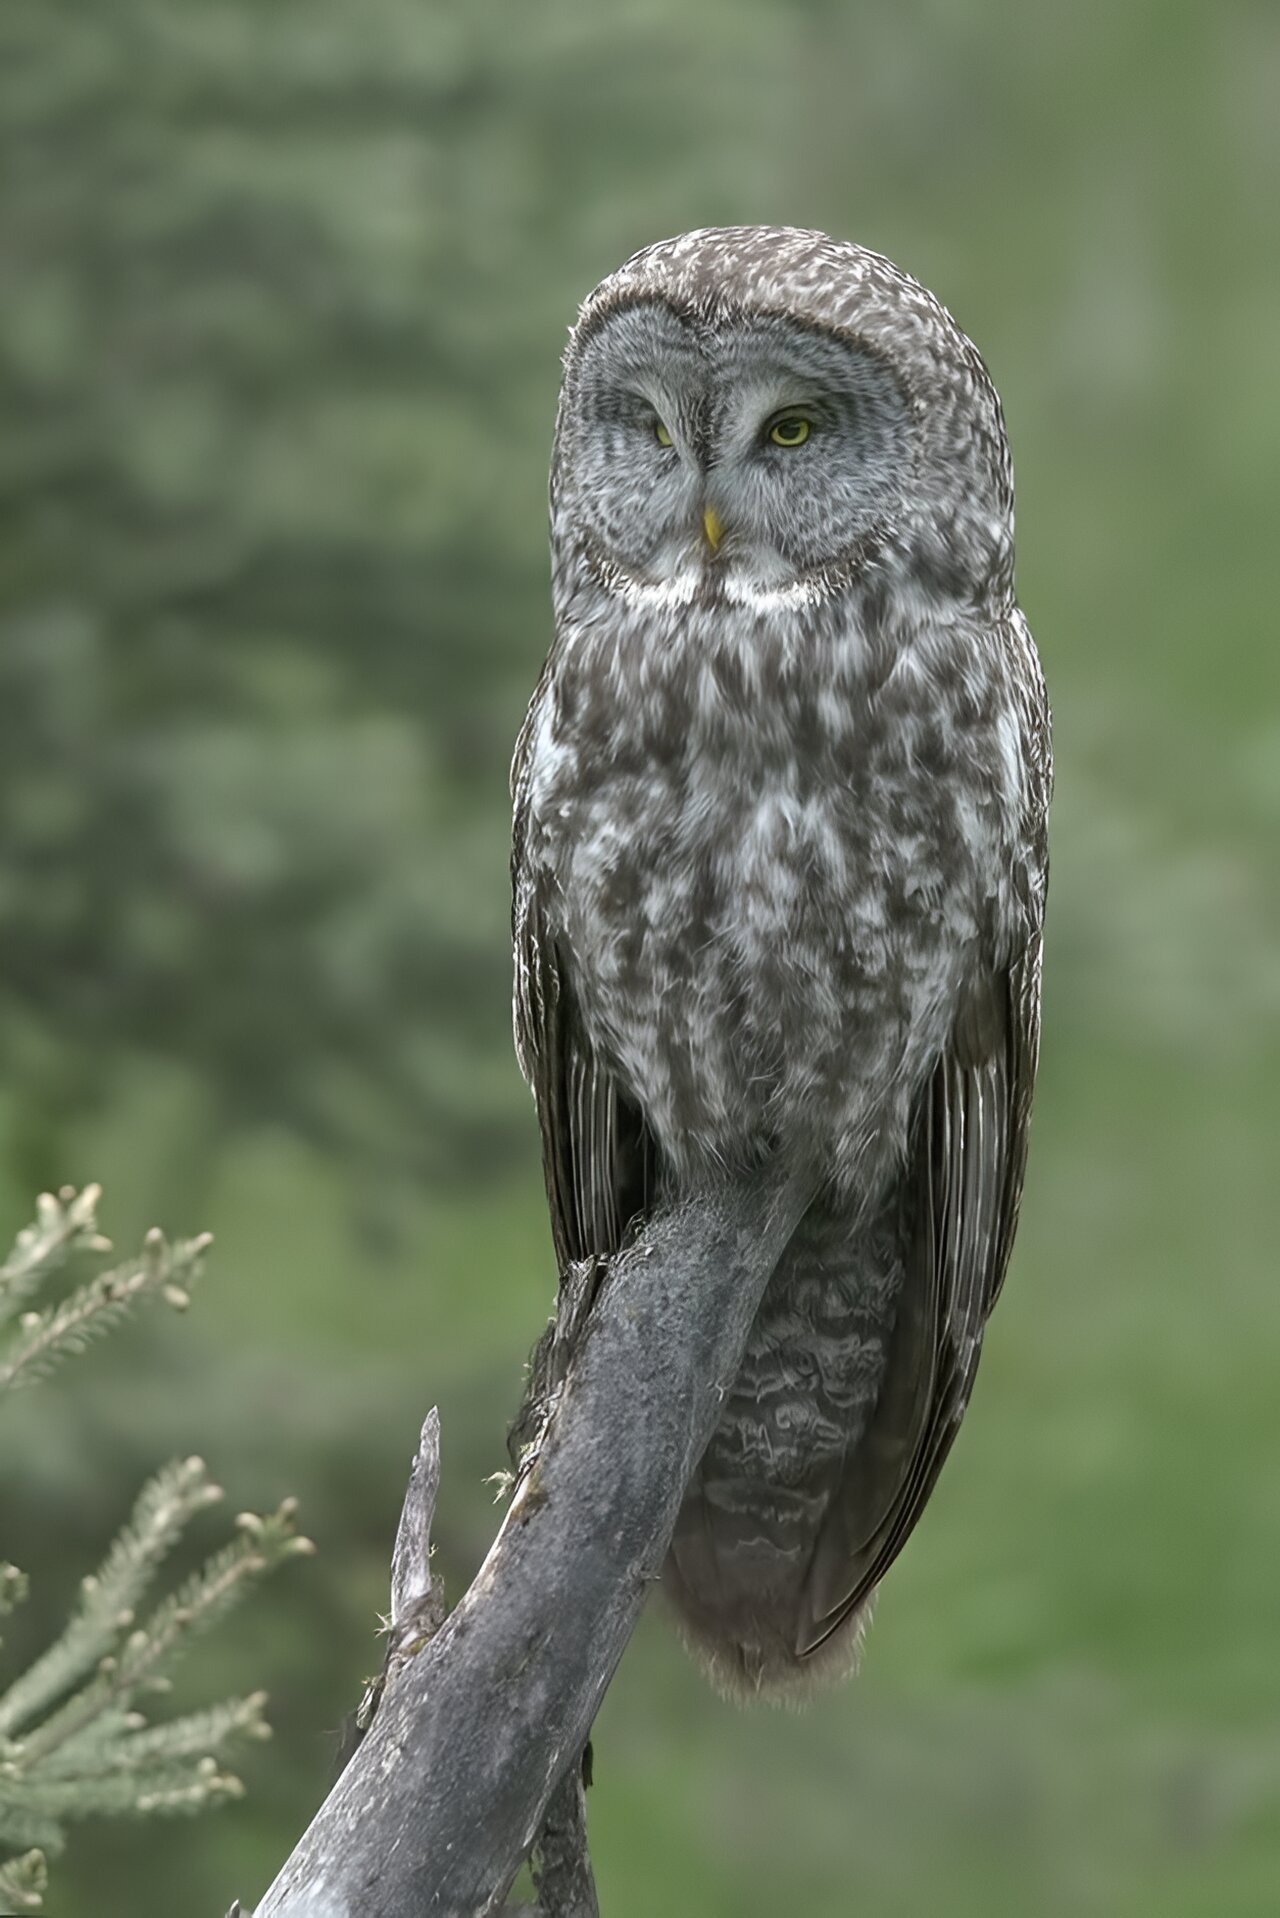 #Machine learning provides a new picture of the great gray owl